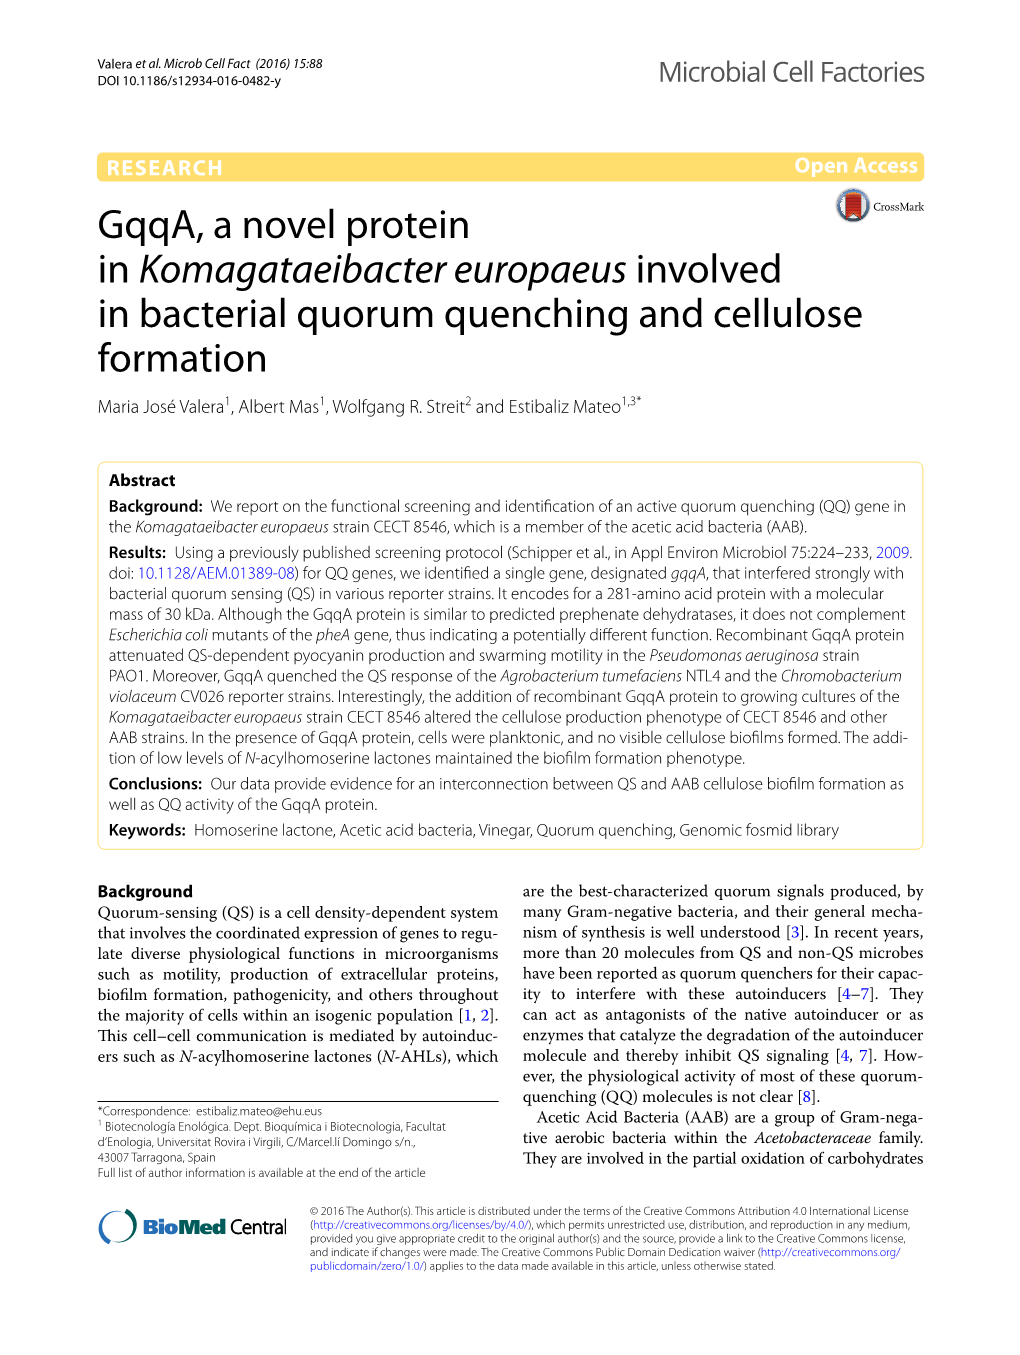 Gqqa, a Novel Protein in Komagataeibacter Europaeus Involved in Bacterial Quorum Quenching and Cellulose Formation Maria José Valera1, Albert Mas1, Wolfgang R